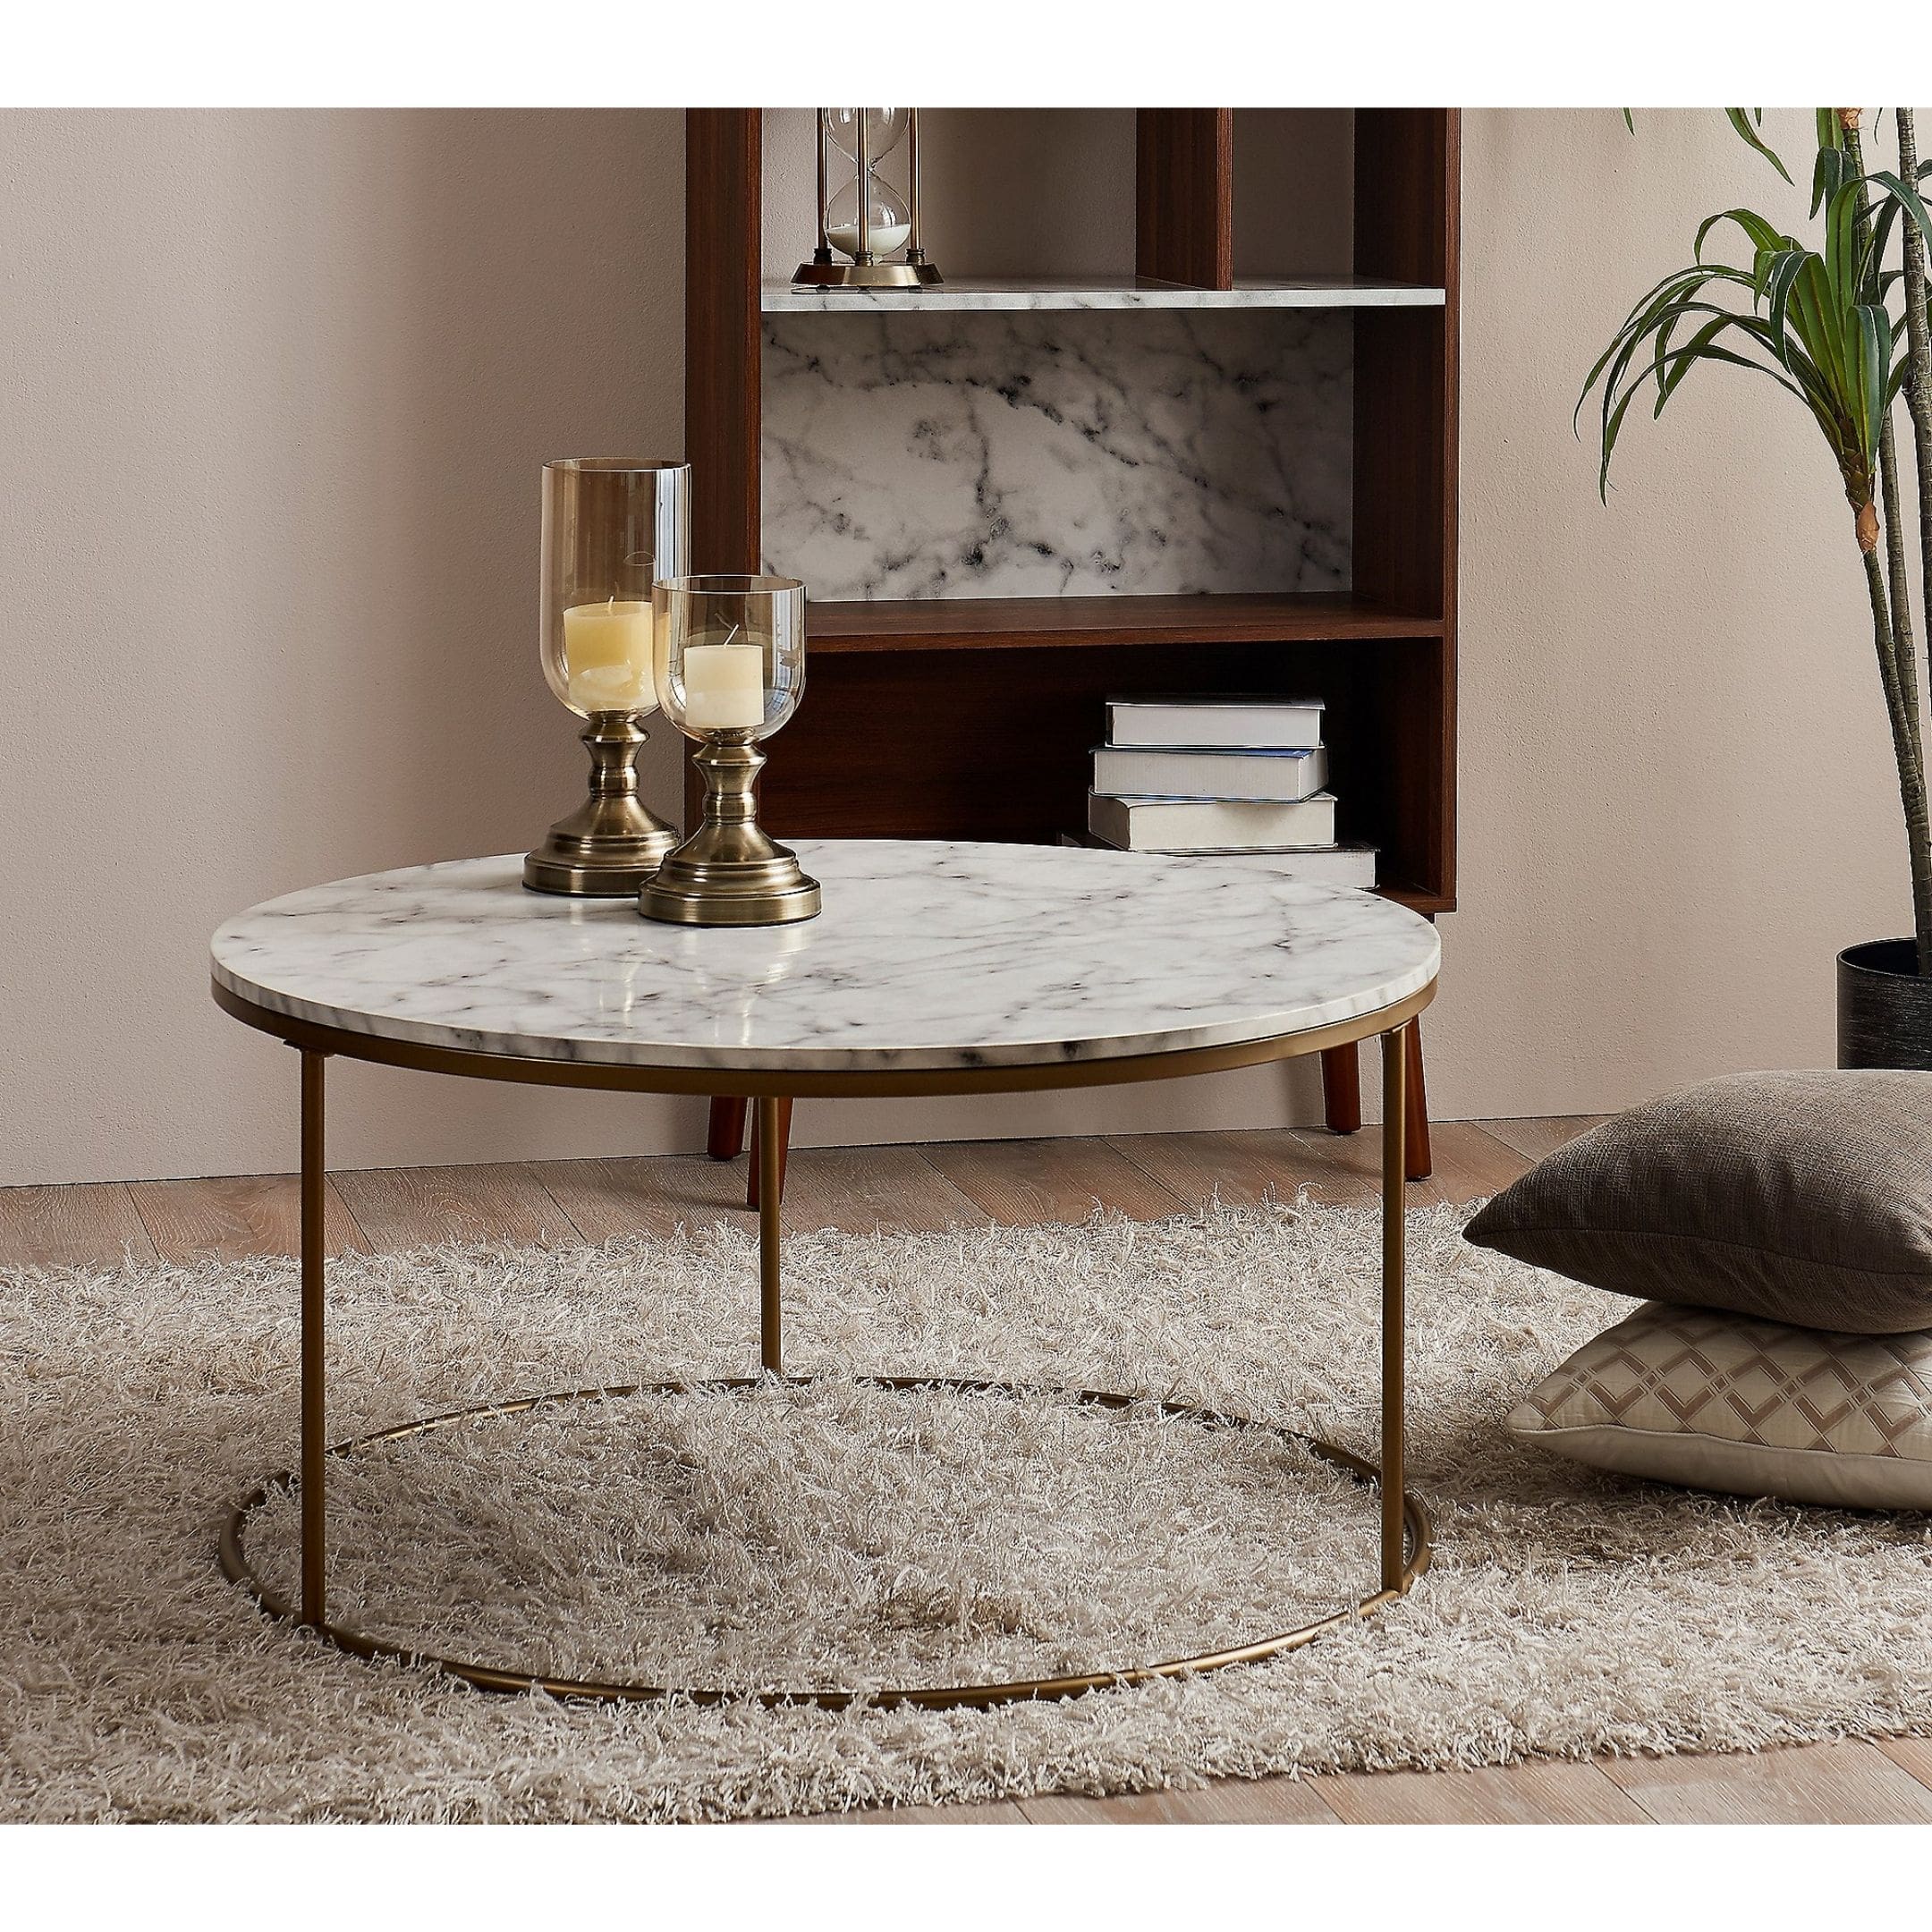 Round marble coffee table with stone top and gold legs.